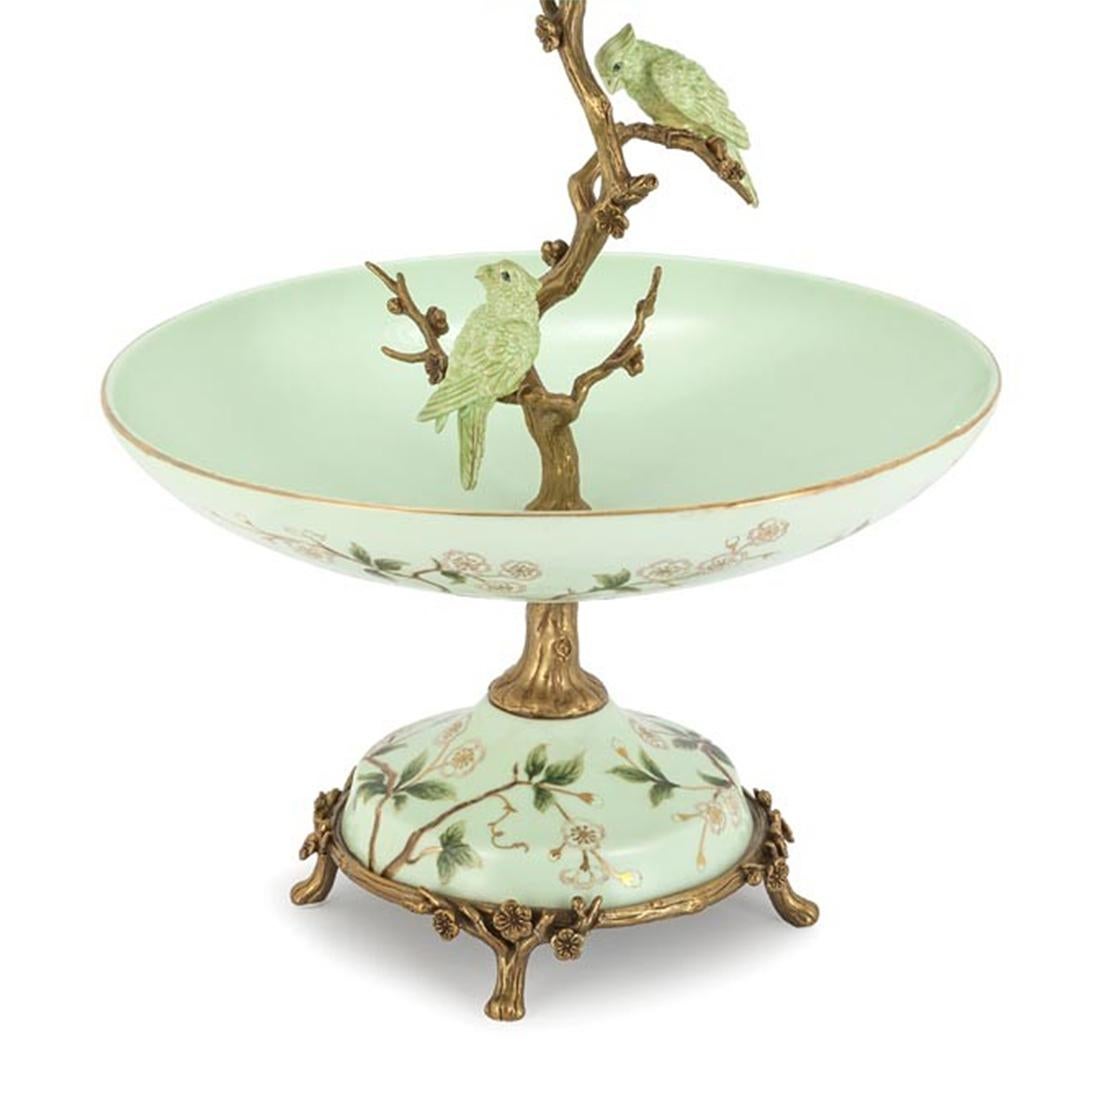 Italian Birdy Center Table Serving Piece For Sale